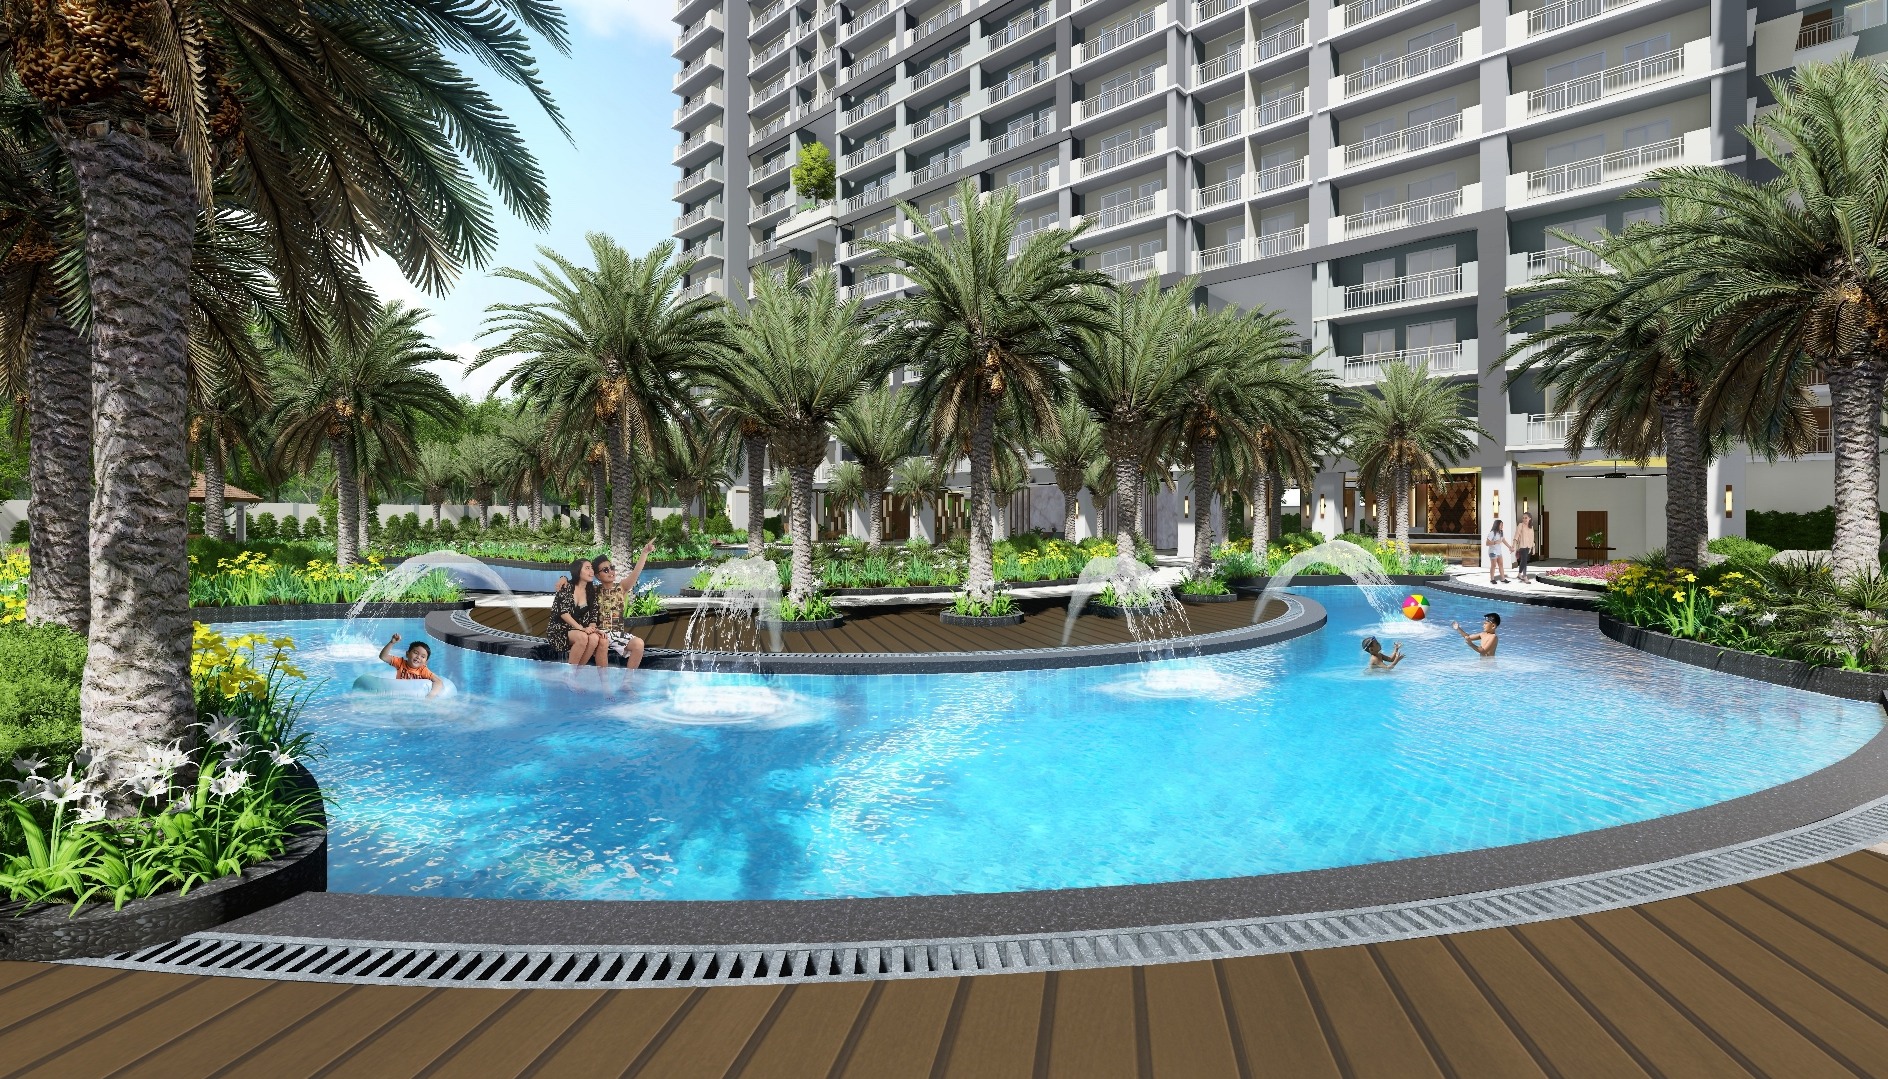 las-pinas-condo-blends-comforts-of-urban-living-and-resort-style-relaxation-1643793808280